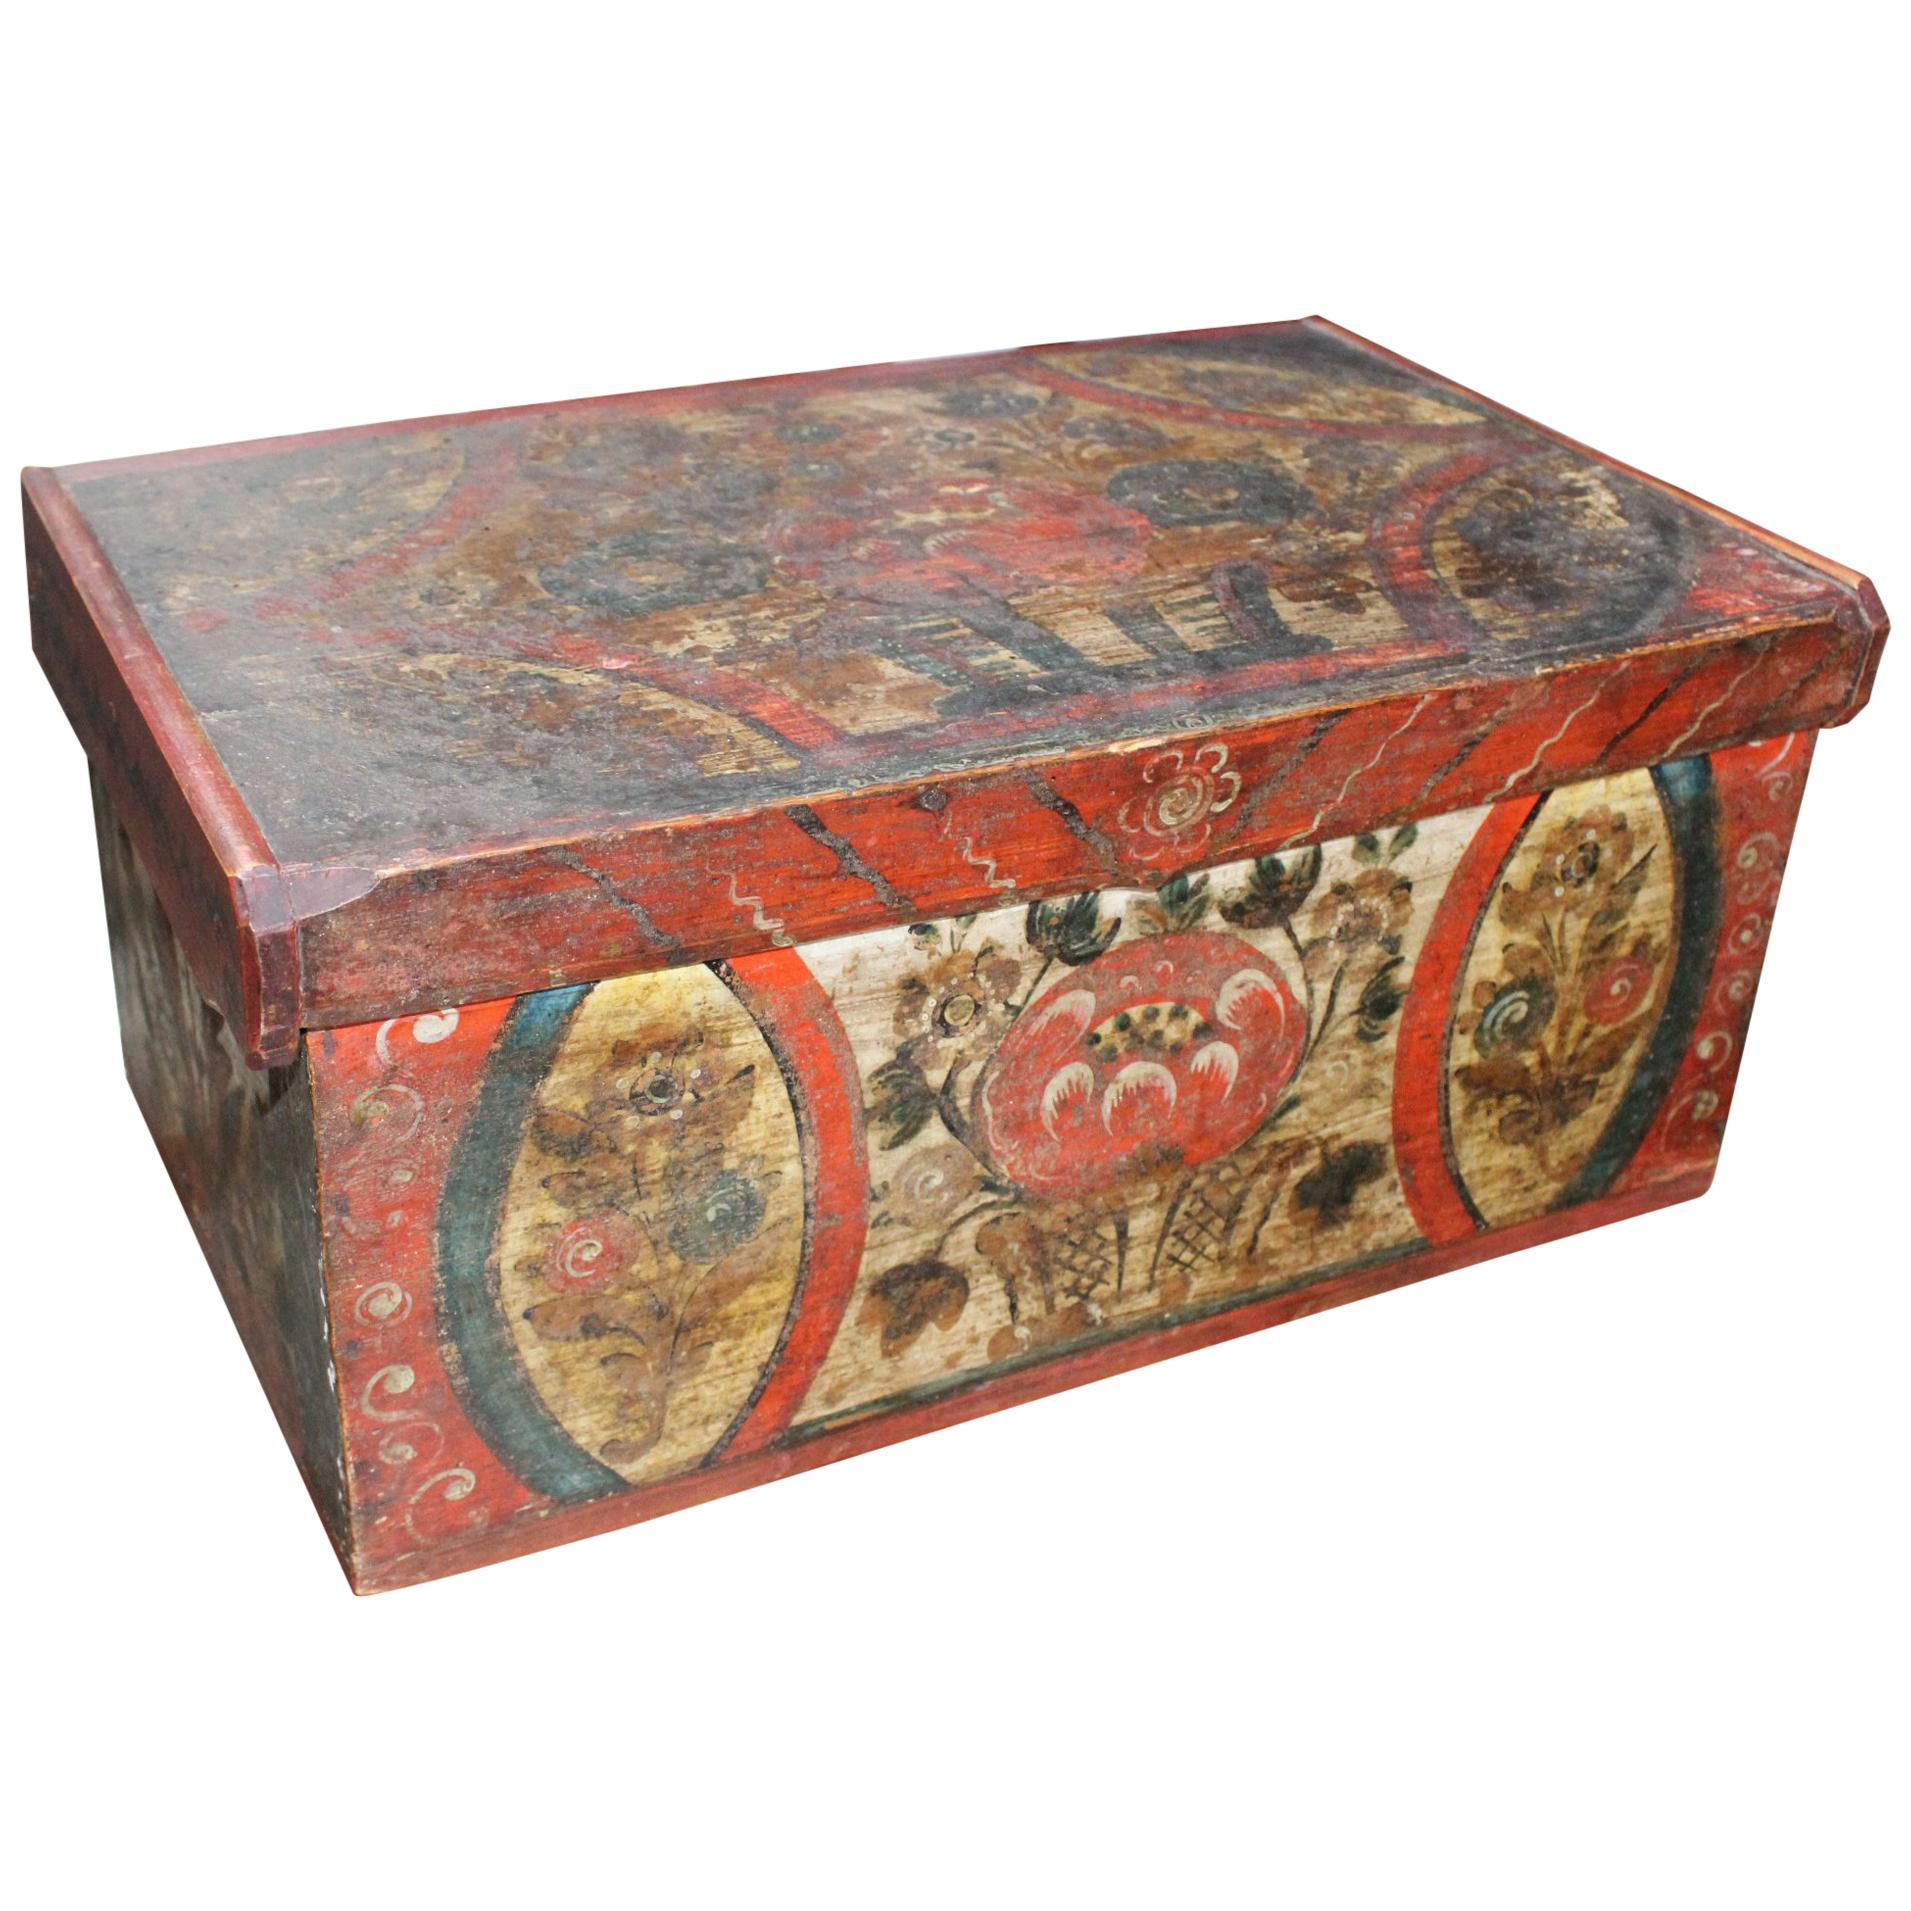 18th Century Swiss Hand Painted Wooden Box with Vegetable Motifs